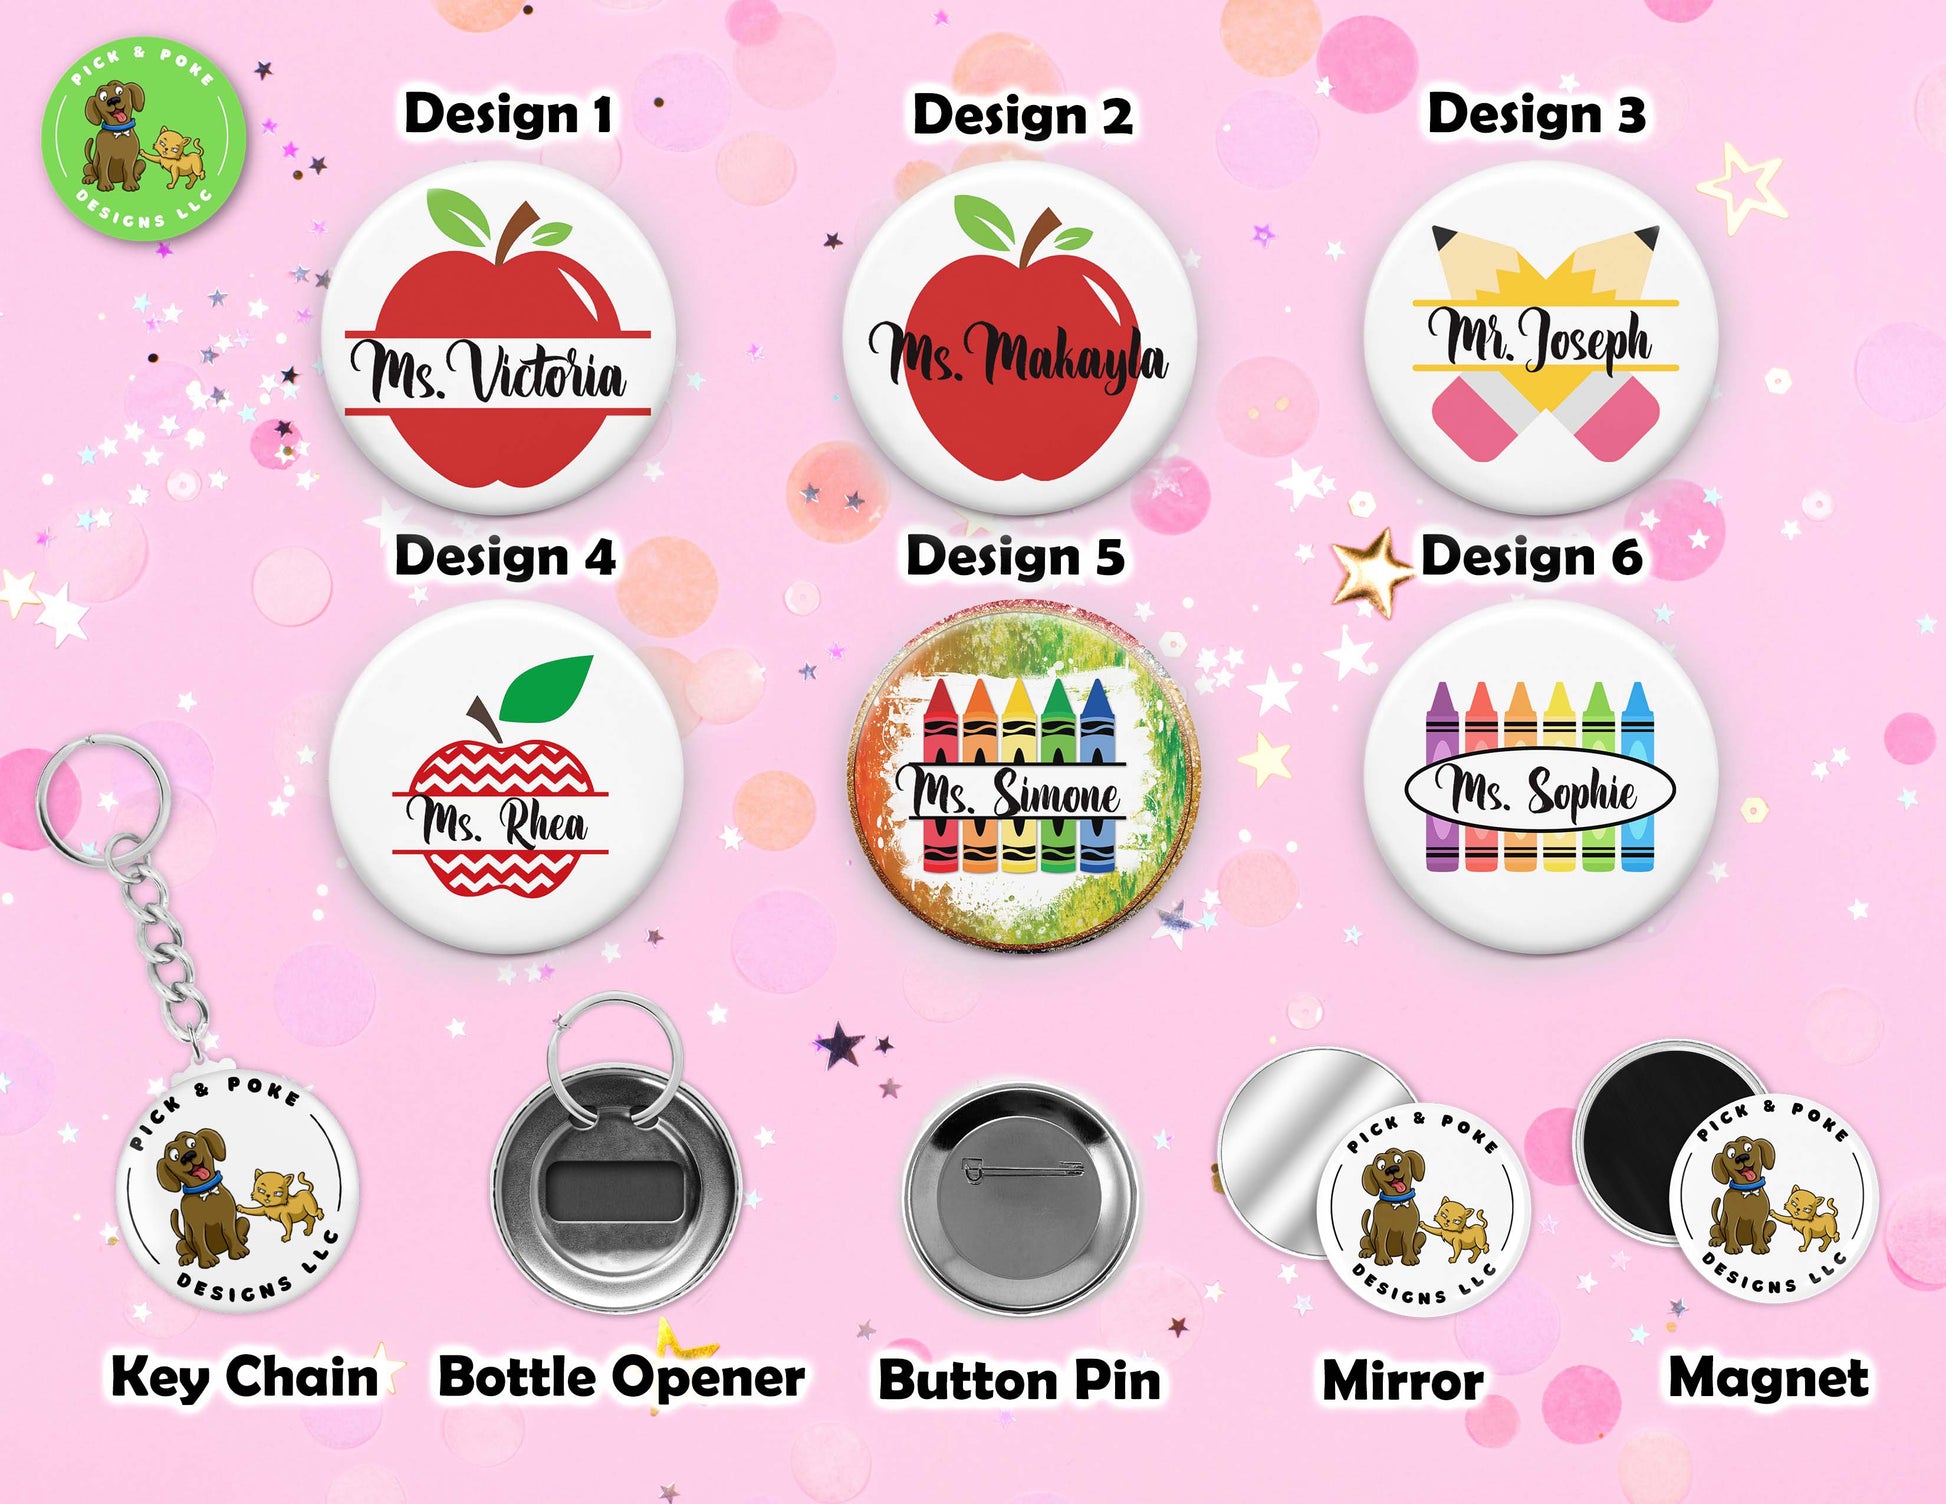 Personalized Teacher Name | Button Pin, Keychain, Magnet, Bottle Opener, or Mirror Option | 2.25-Inch Size Design 5 / Pinback Button Pin